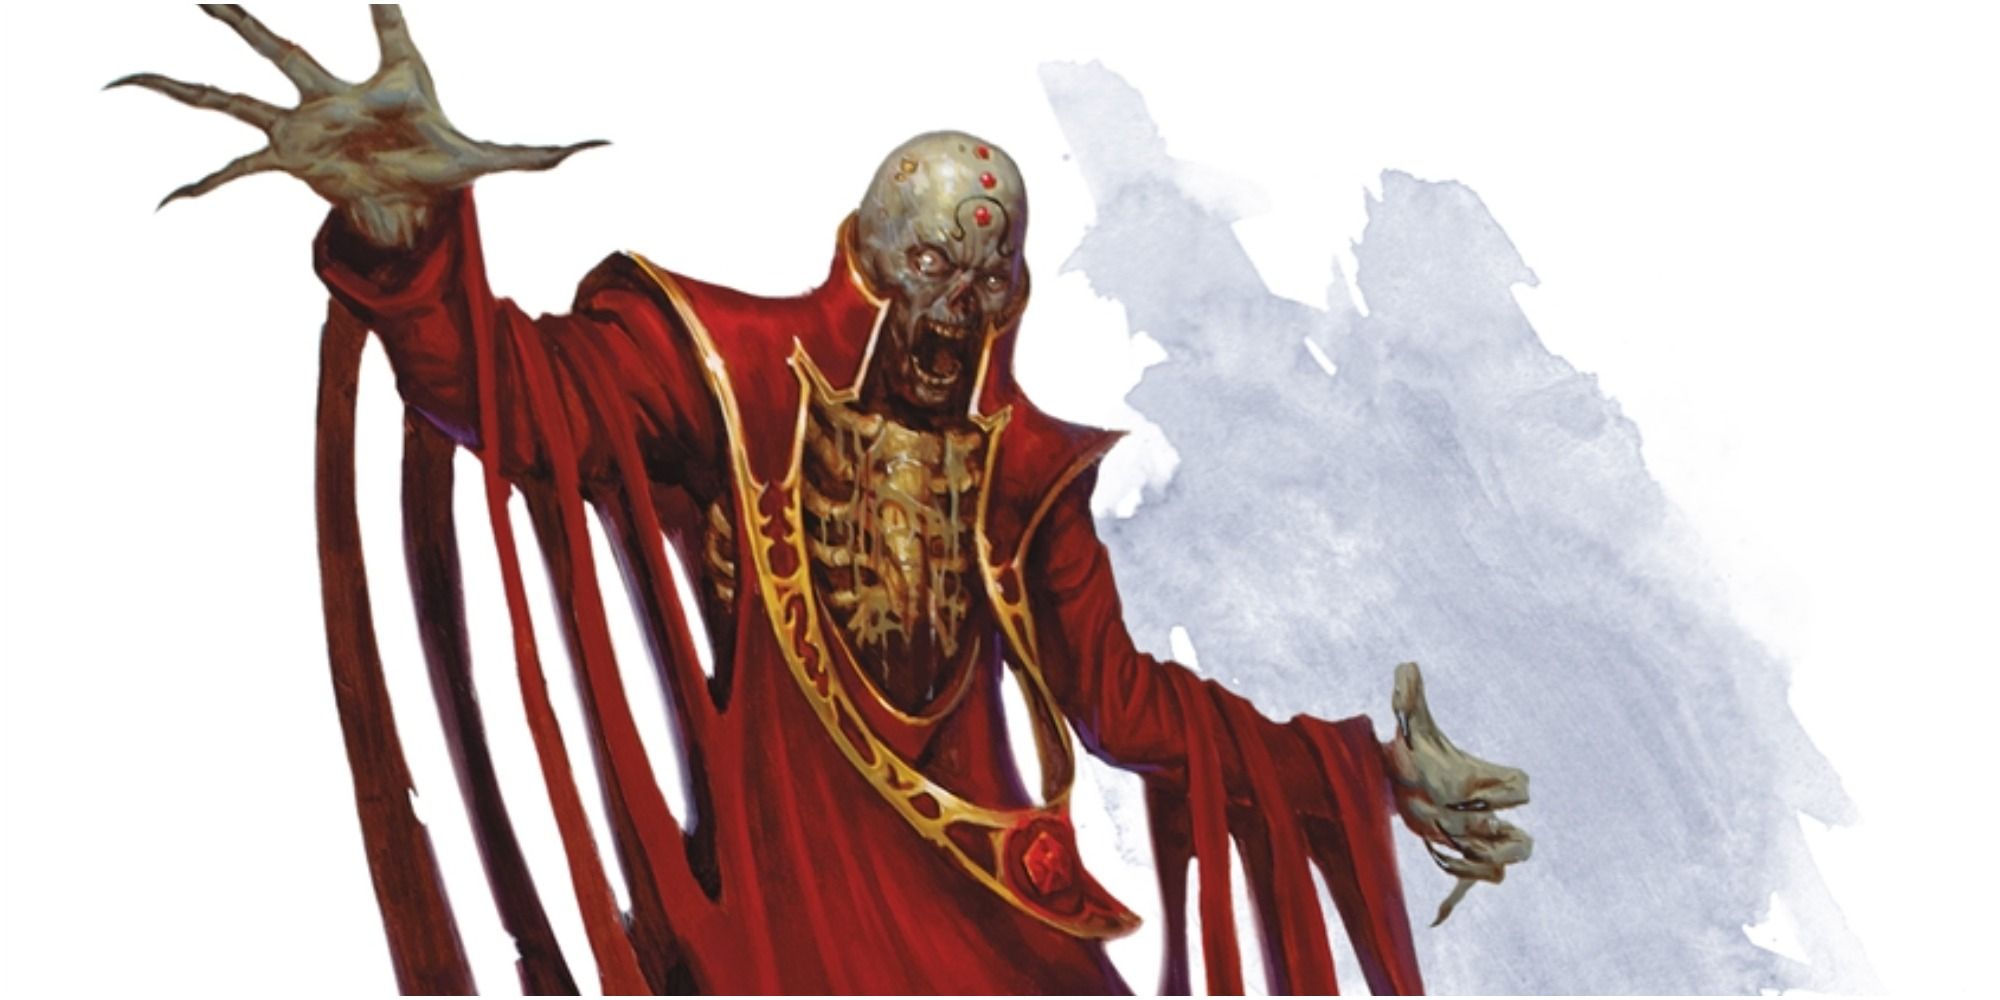 10 Most Difficult To Kill Monsters In Dungeons & Dragons